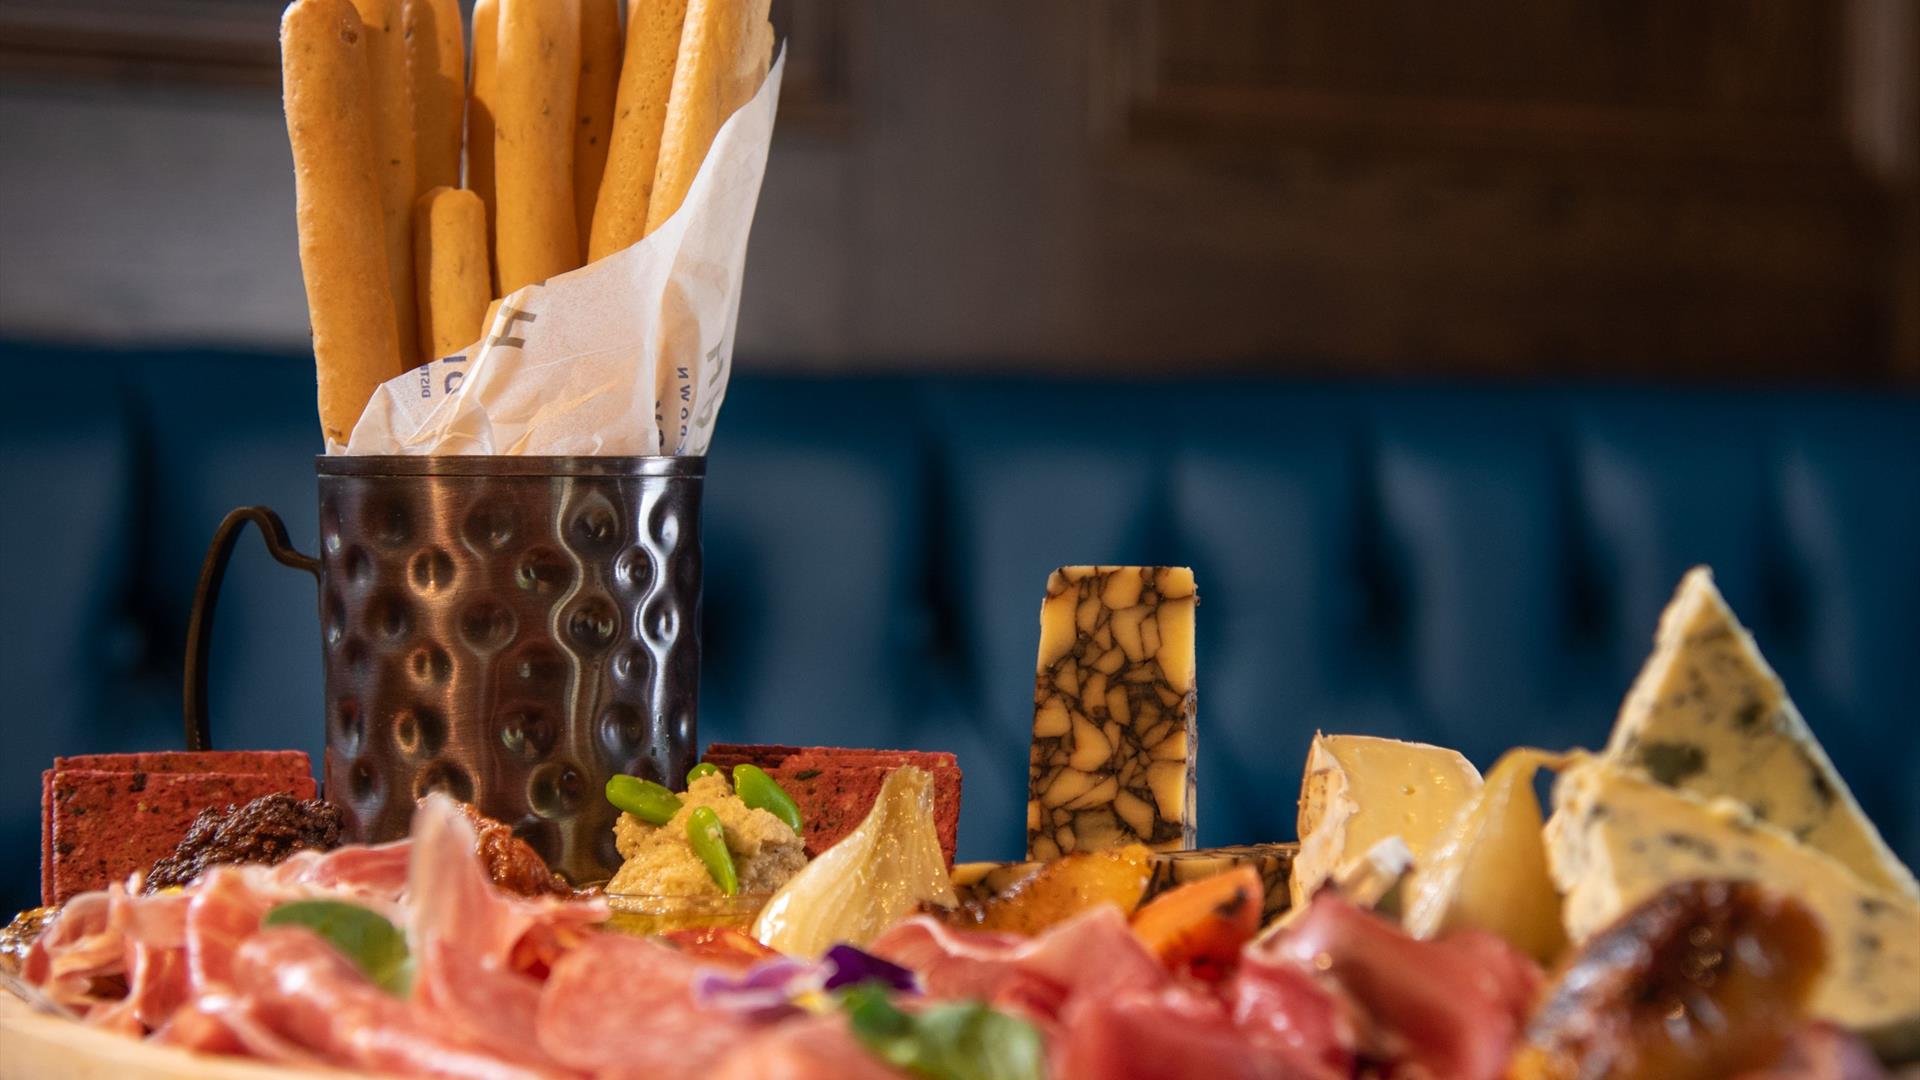 A platter of cheese and meats served at Hinch Brasserie